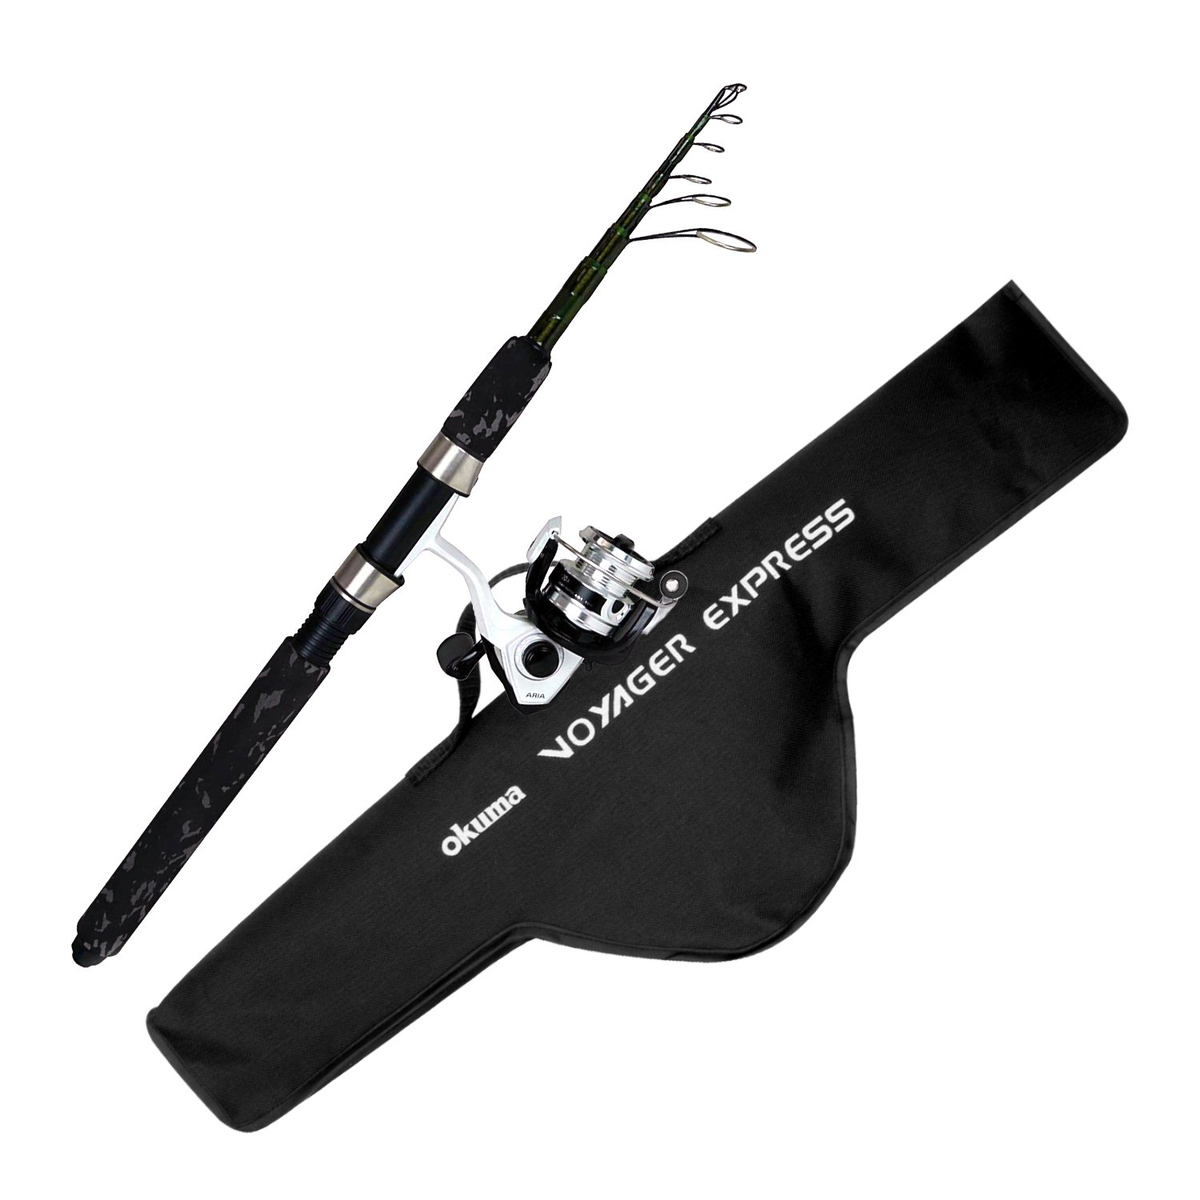 Okuma Voyager Express Travel Spinning Rod and Reel Combo